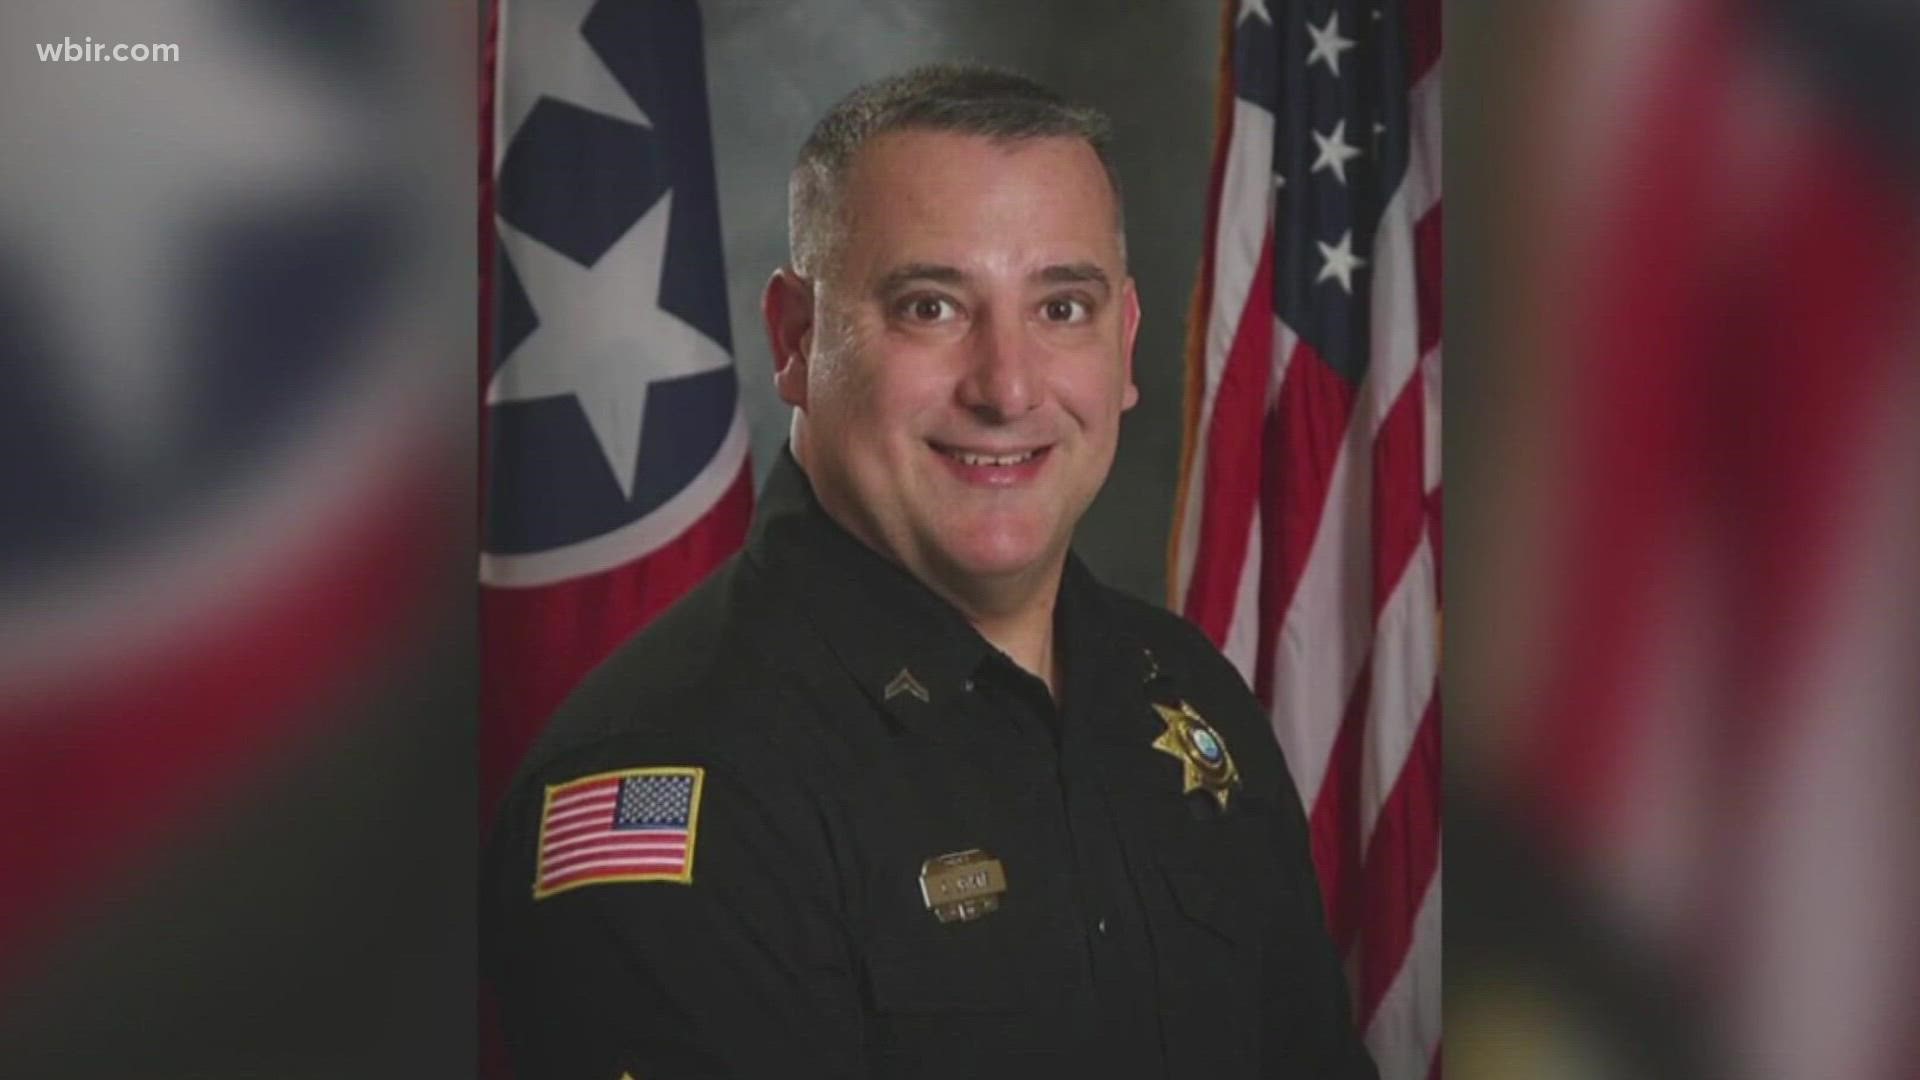 Sergeant Chris Jenkins died after a truck crash on I-75 more than a week ago, and the community is still outpouring love and support.